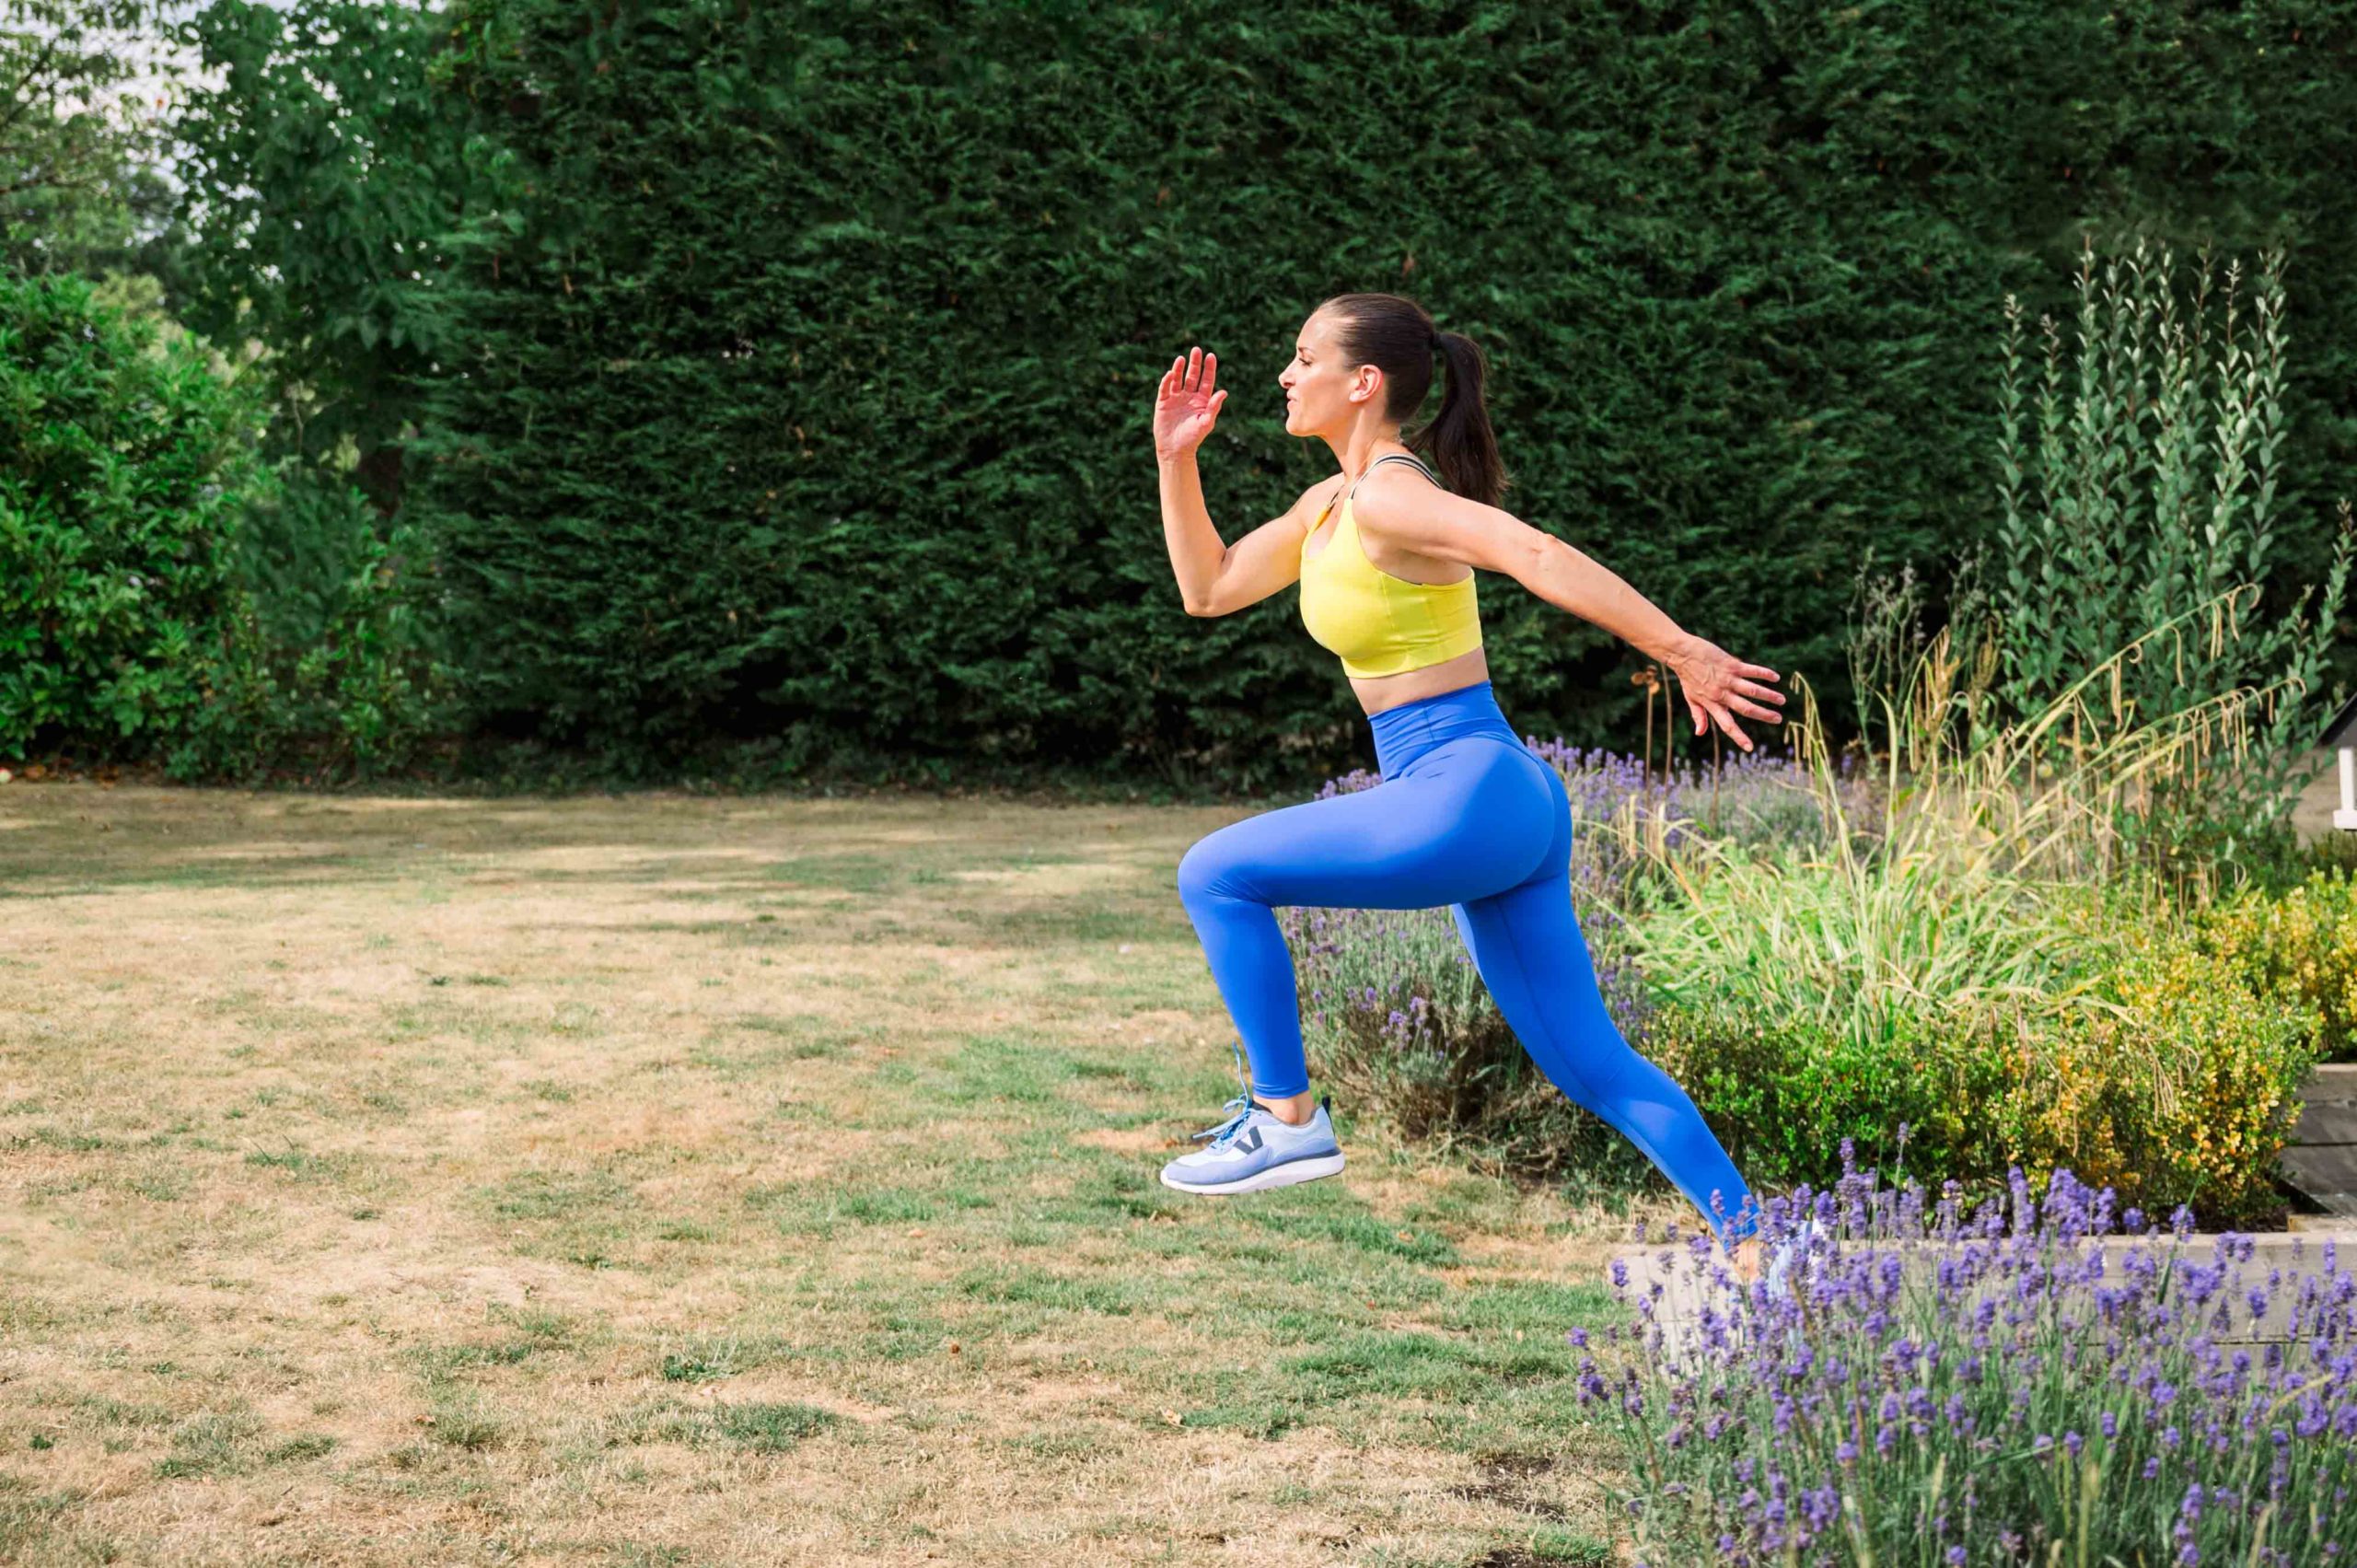 Brown haired lady running in a yellow top and blue leggings